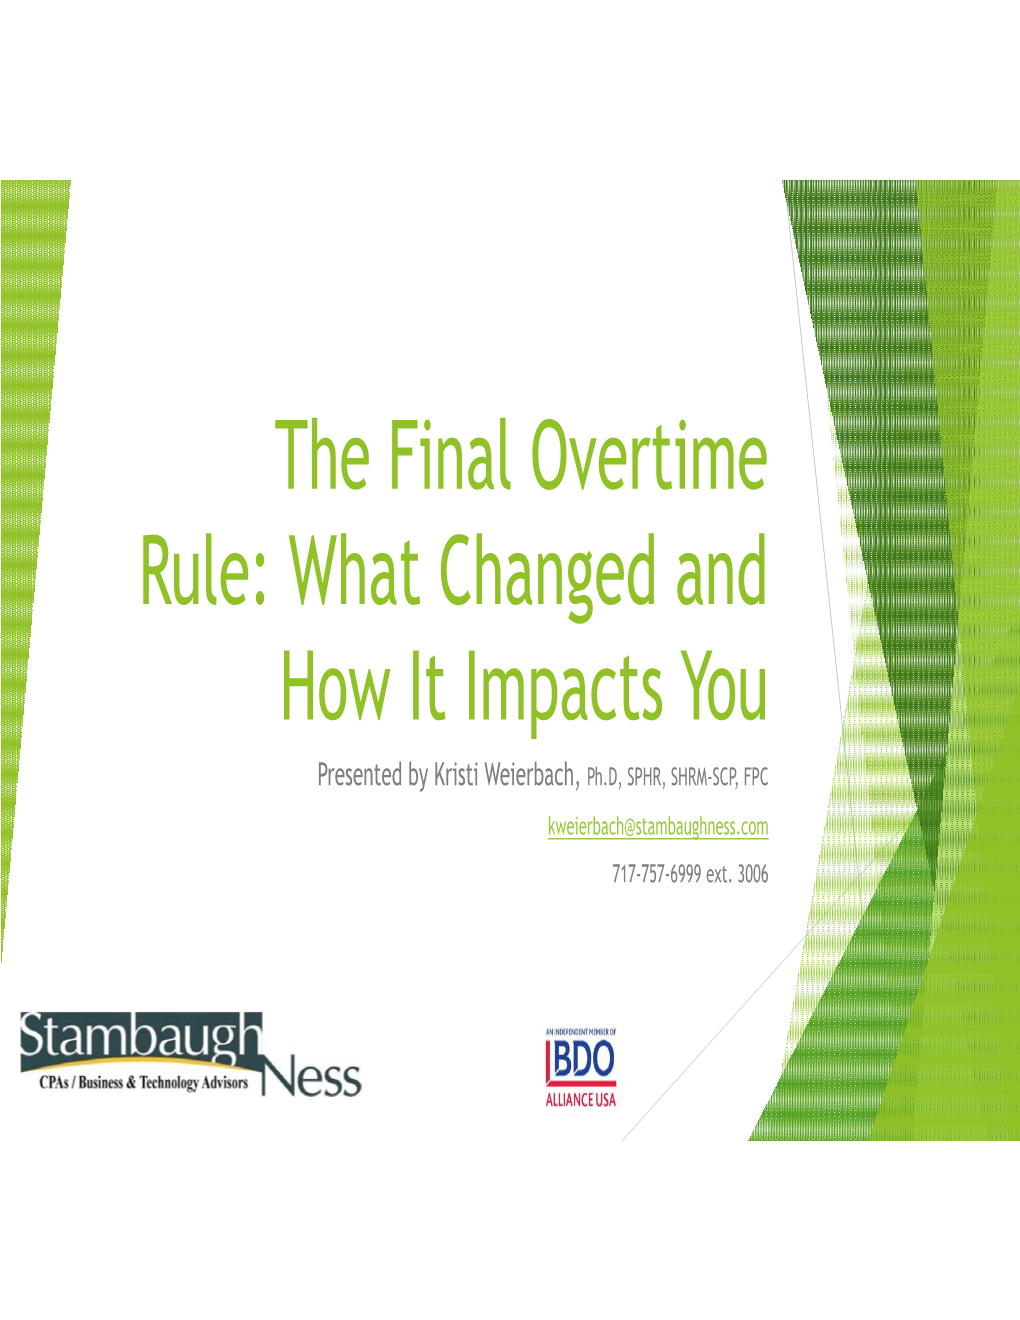 The Final Overtime Rule: What Changed and How It Impacts You Presented by Kristi Weierbach, Ph.D, SPHR, SHRM-SCP, FPC Kweierbach@Stambaughness.Com 717-757-6999 Ext